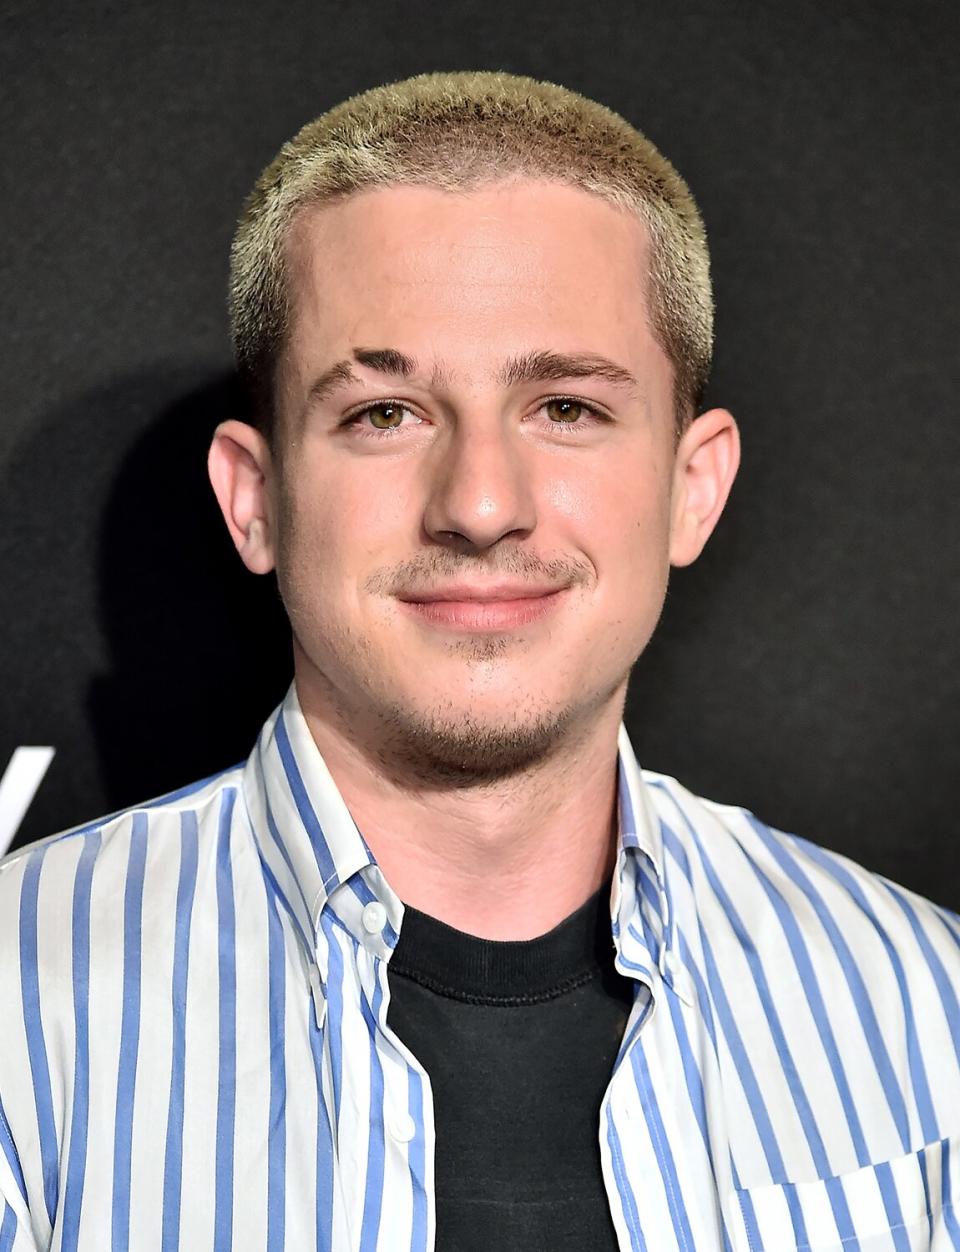 NEW YORK, NEW YORK - SEPTEMBER 09: Charlie Puth attends DKNY 30th Anniversary party at St. Ann's Warehouse on September 09, 2019